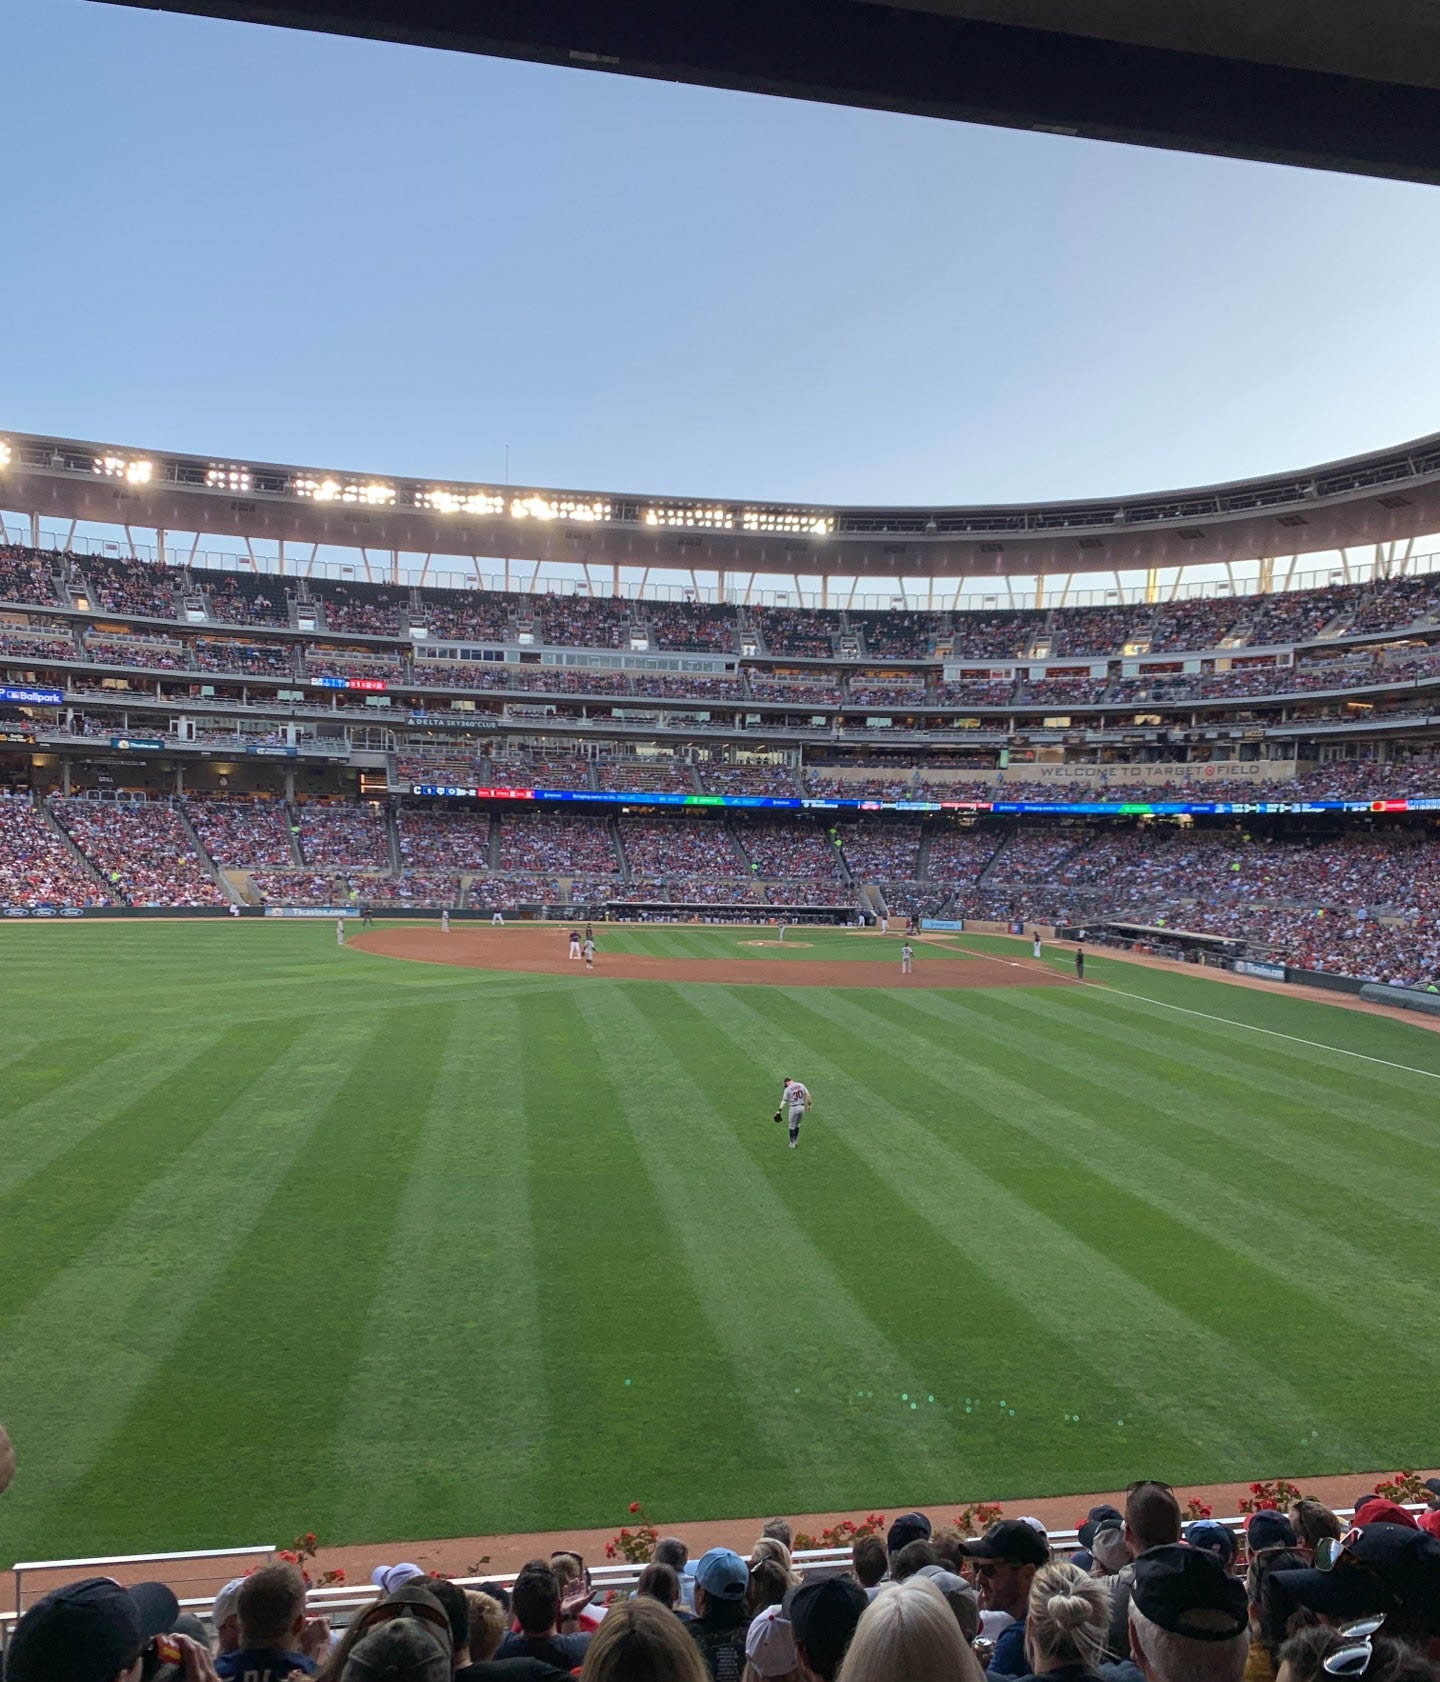 section 130, row 13 seat view  - target field